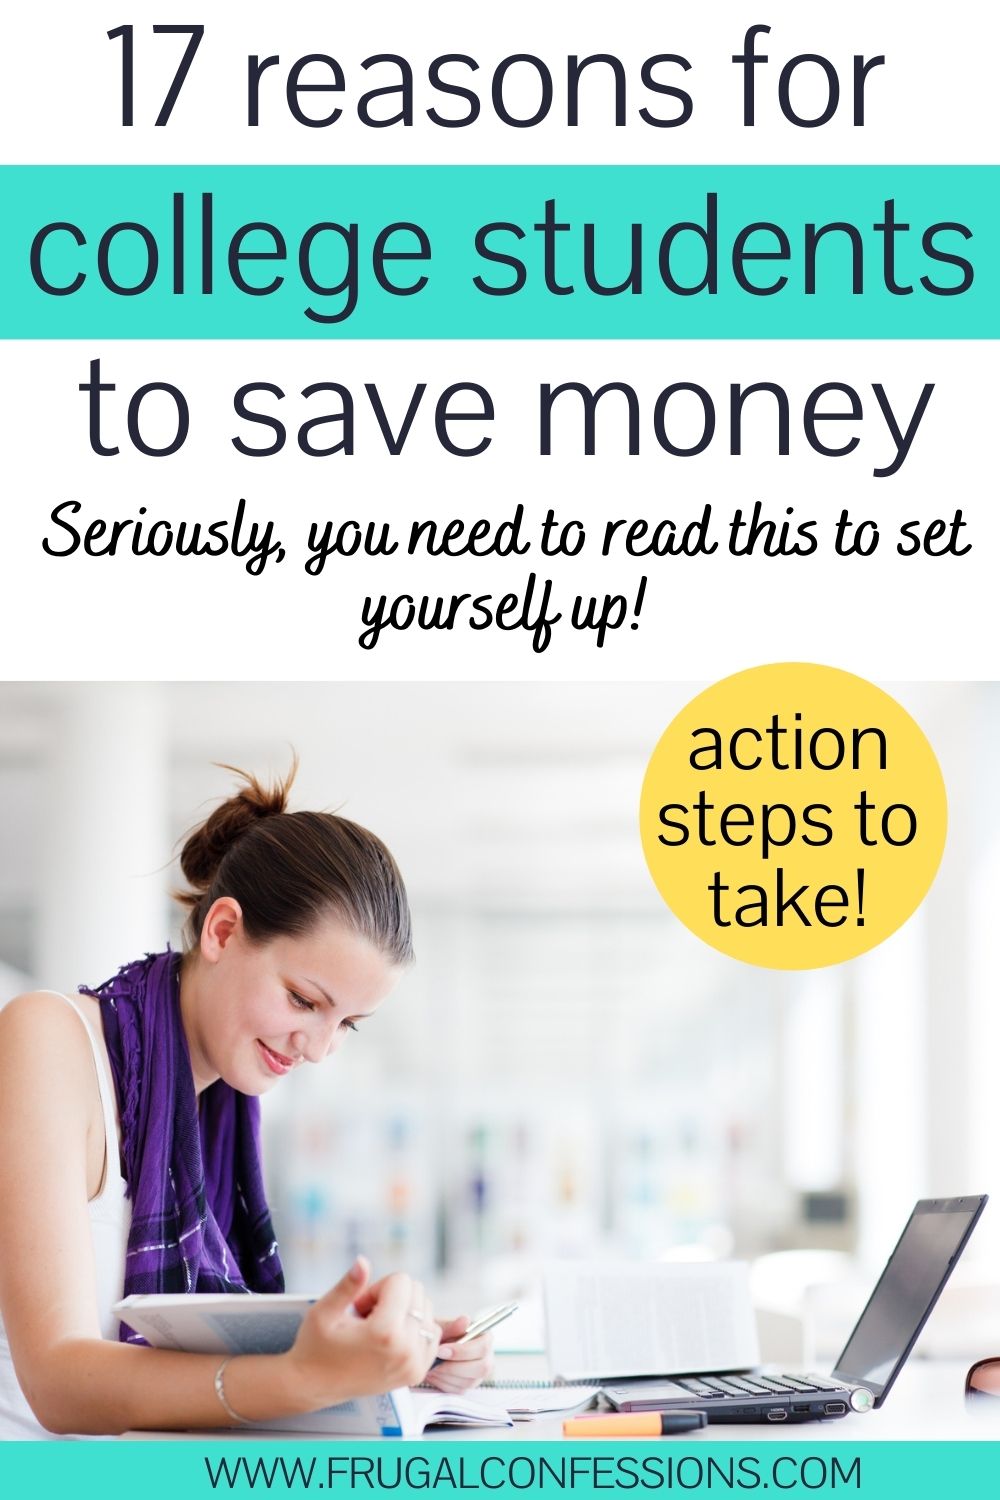 female college student smiling working on laptop, text overlay "17 reasons for college students to save money"